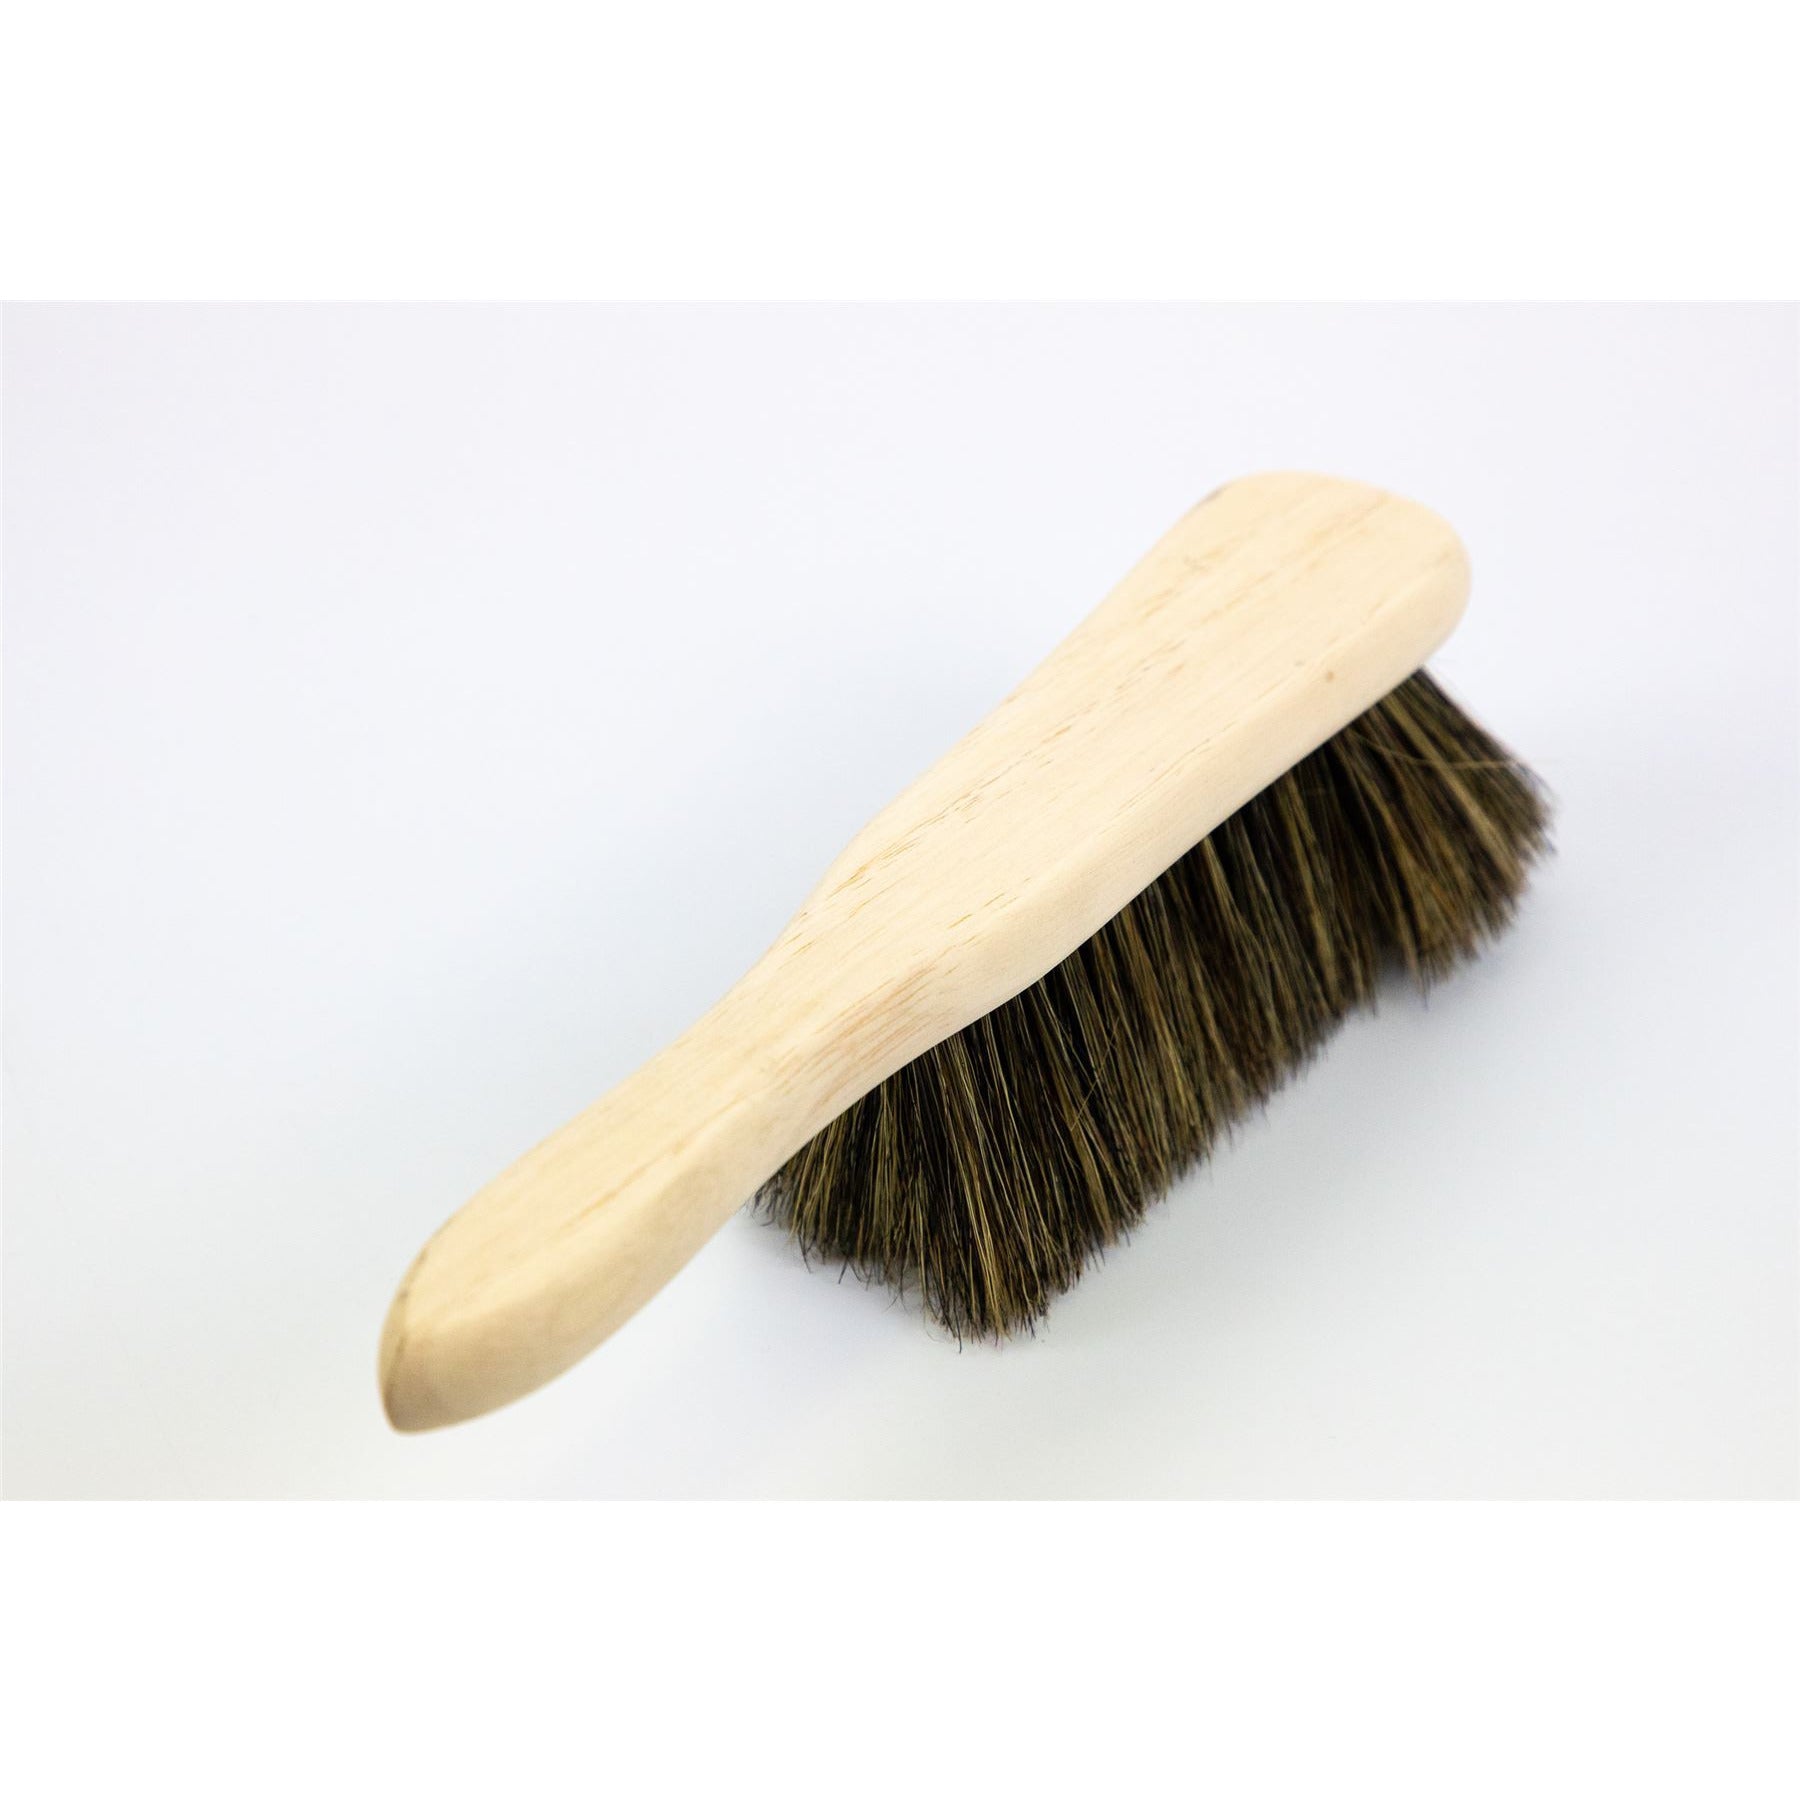 Unvarnished Plain Pure Natural Real Bristle Hair Soft Banister Hand Brush - The Dustpan and Brush Store